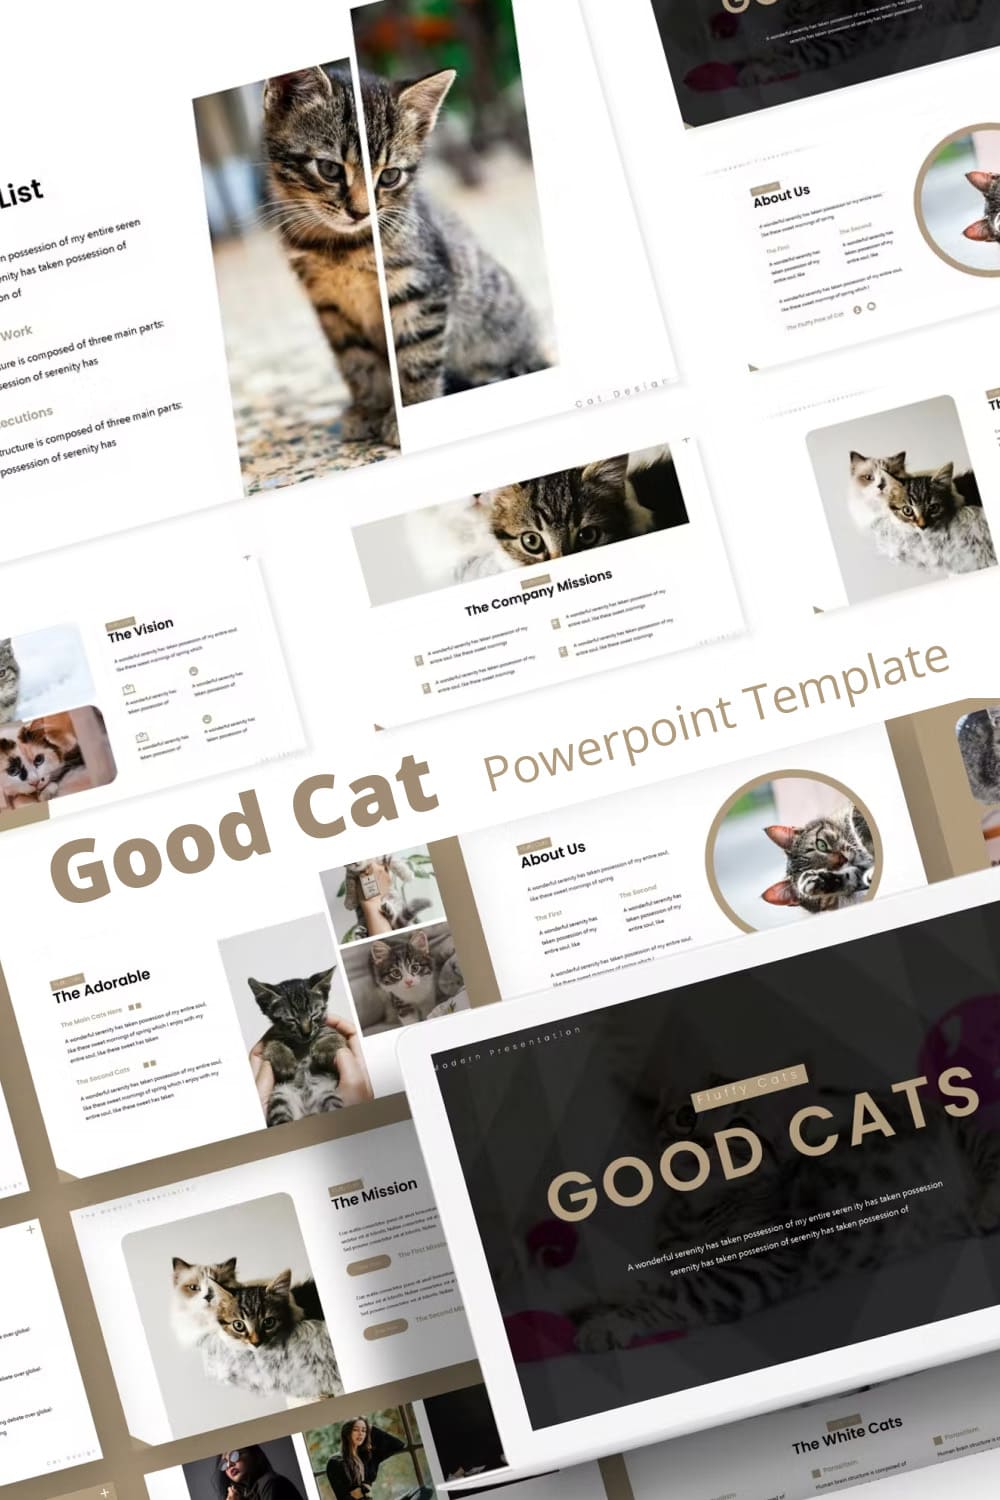 Good cat powerpoint template - pinterest image preview.